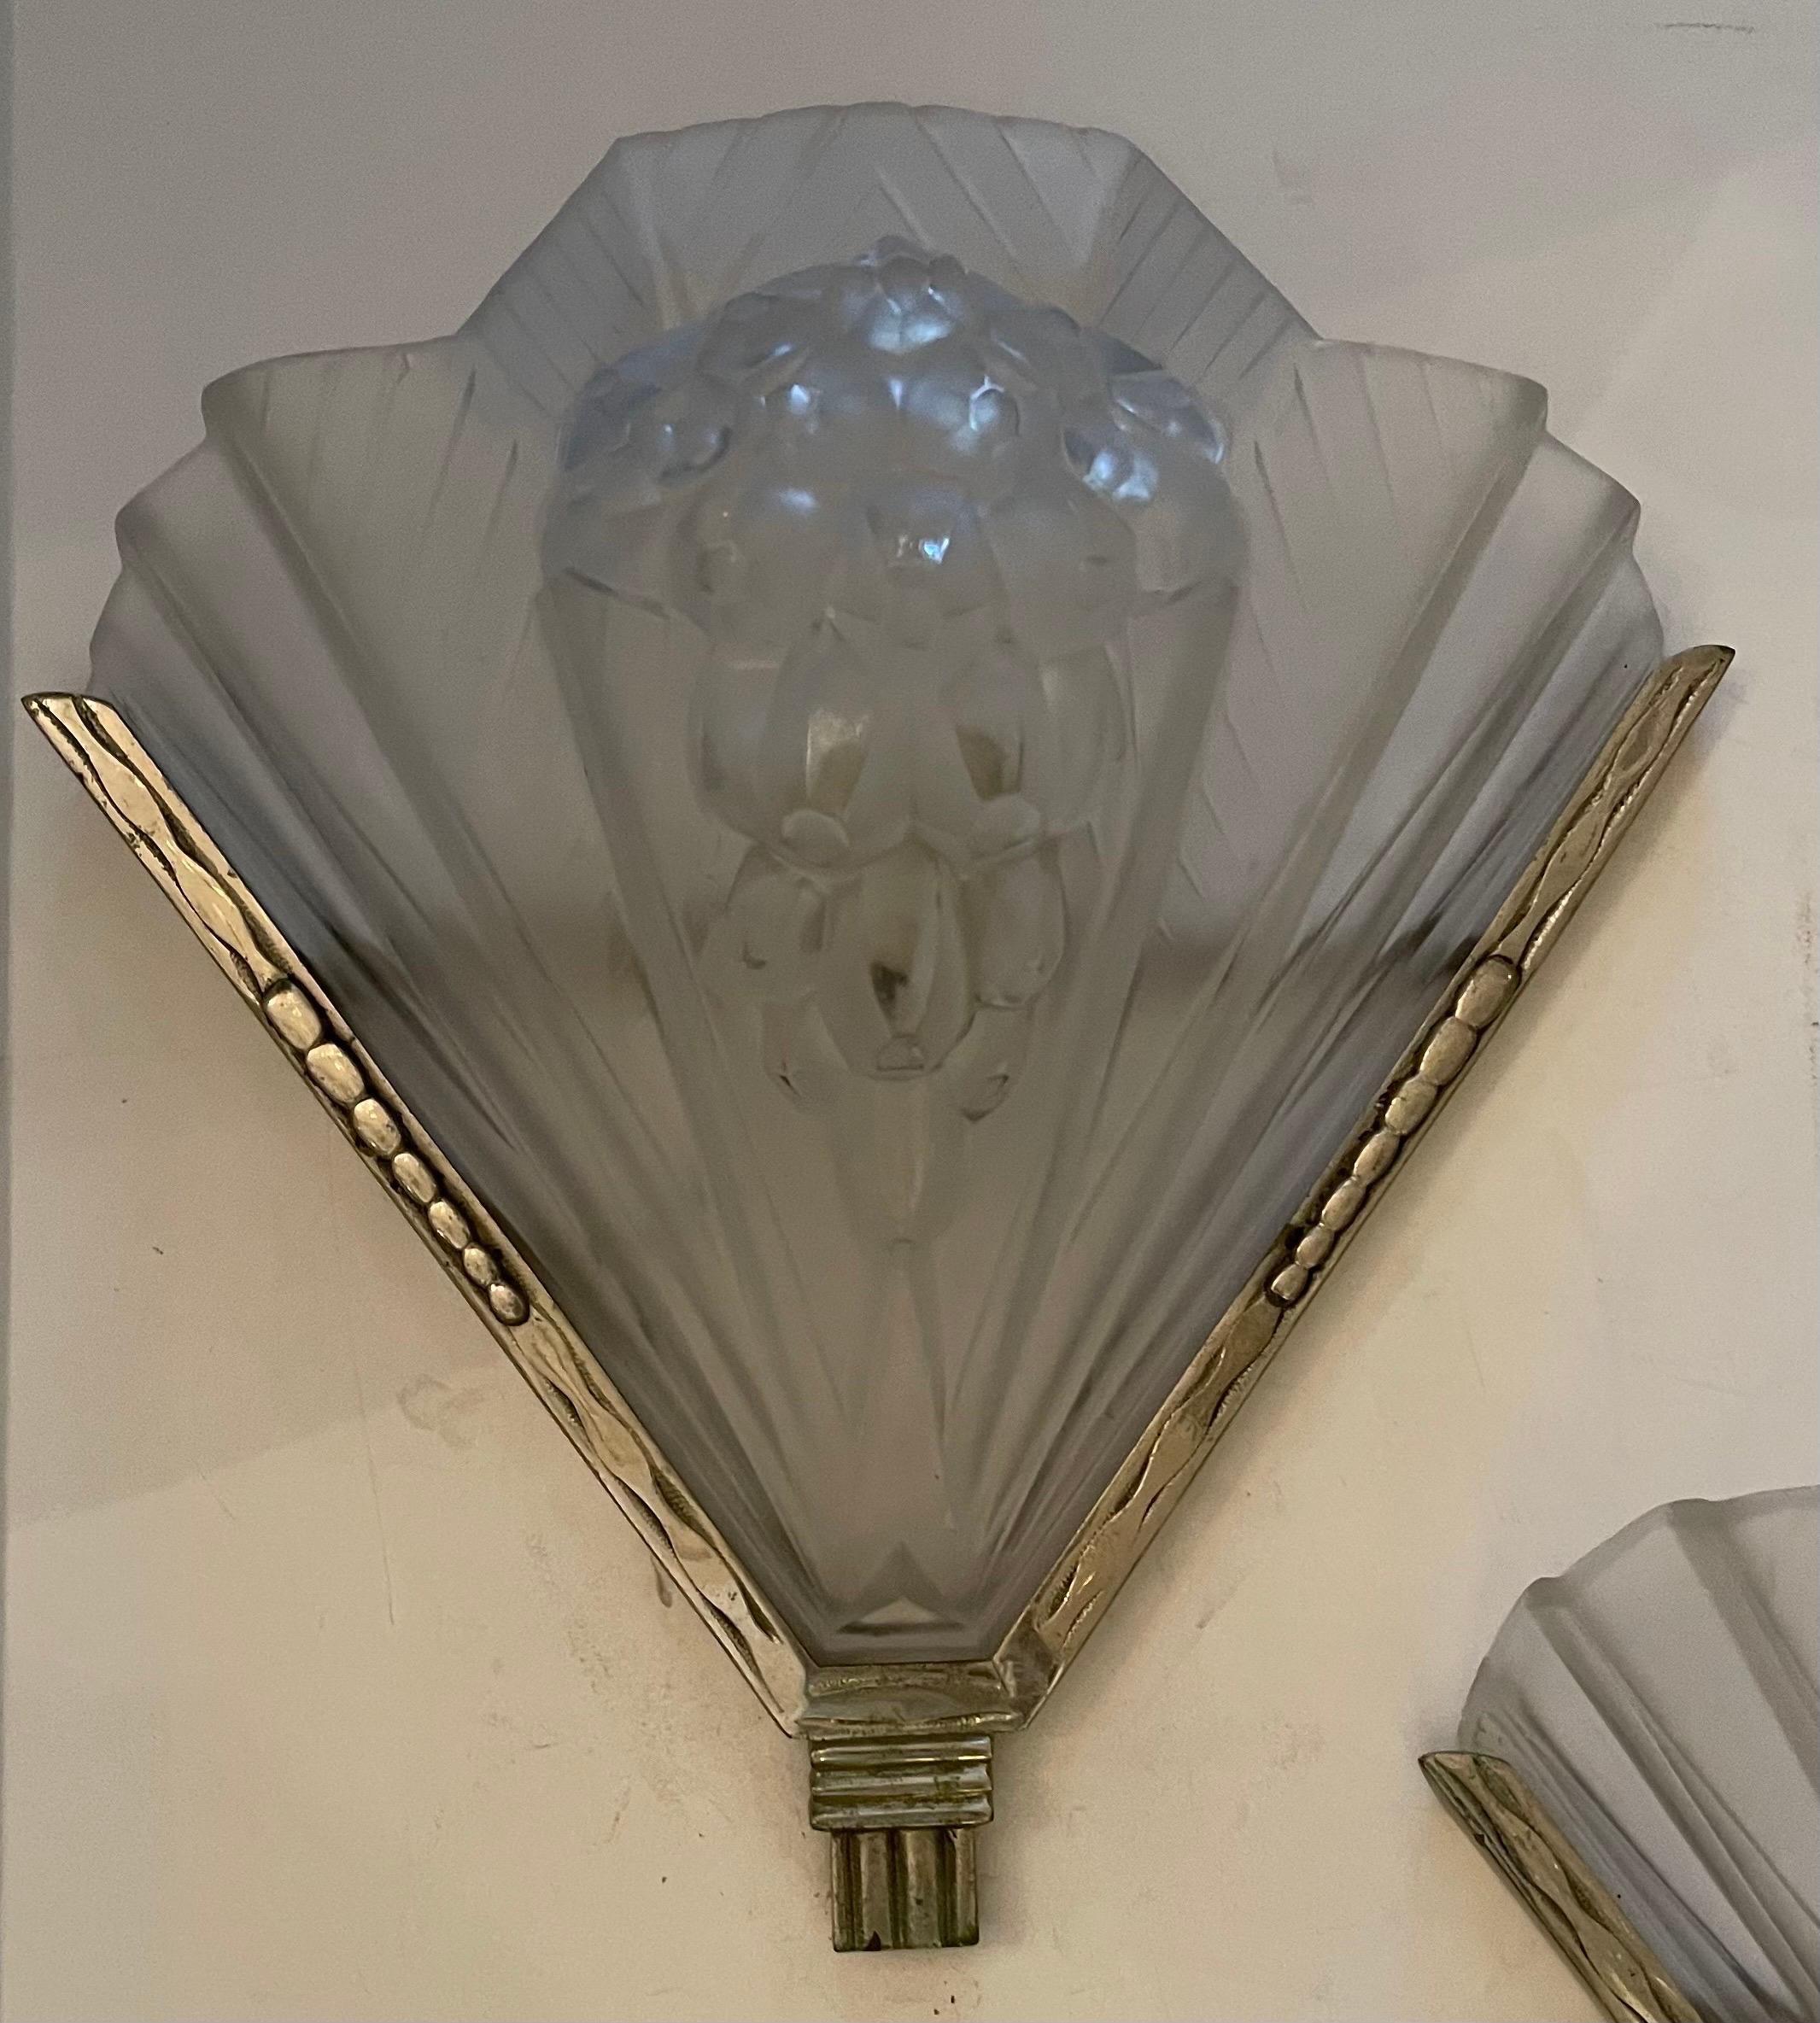 Stunning pair of French Art Deco signed Atelier Petitot sconces. Shades are in clear frosted glass with over flowing intricate geometric motif details. Each shade is marked 